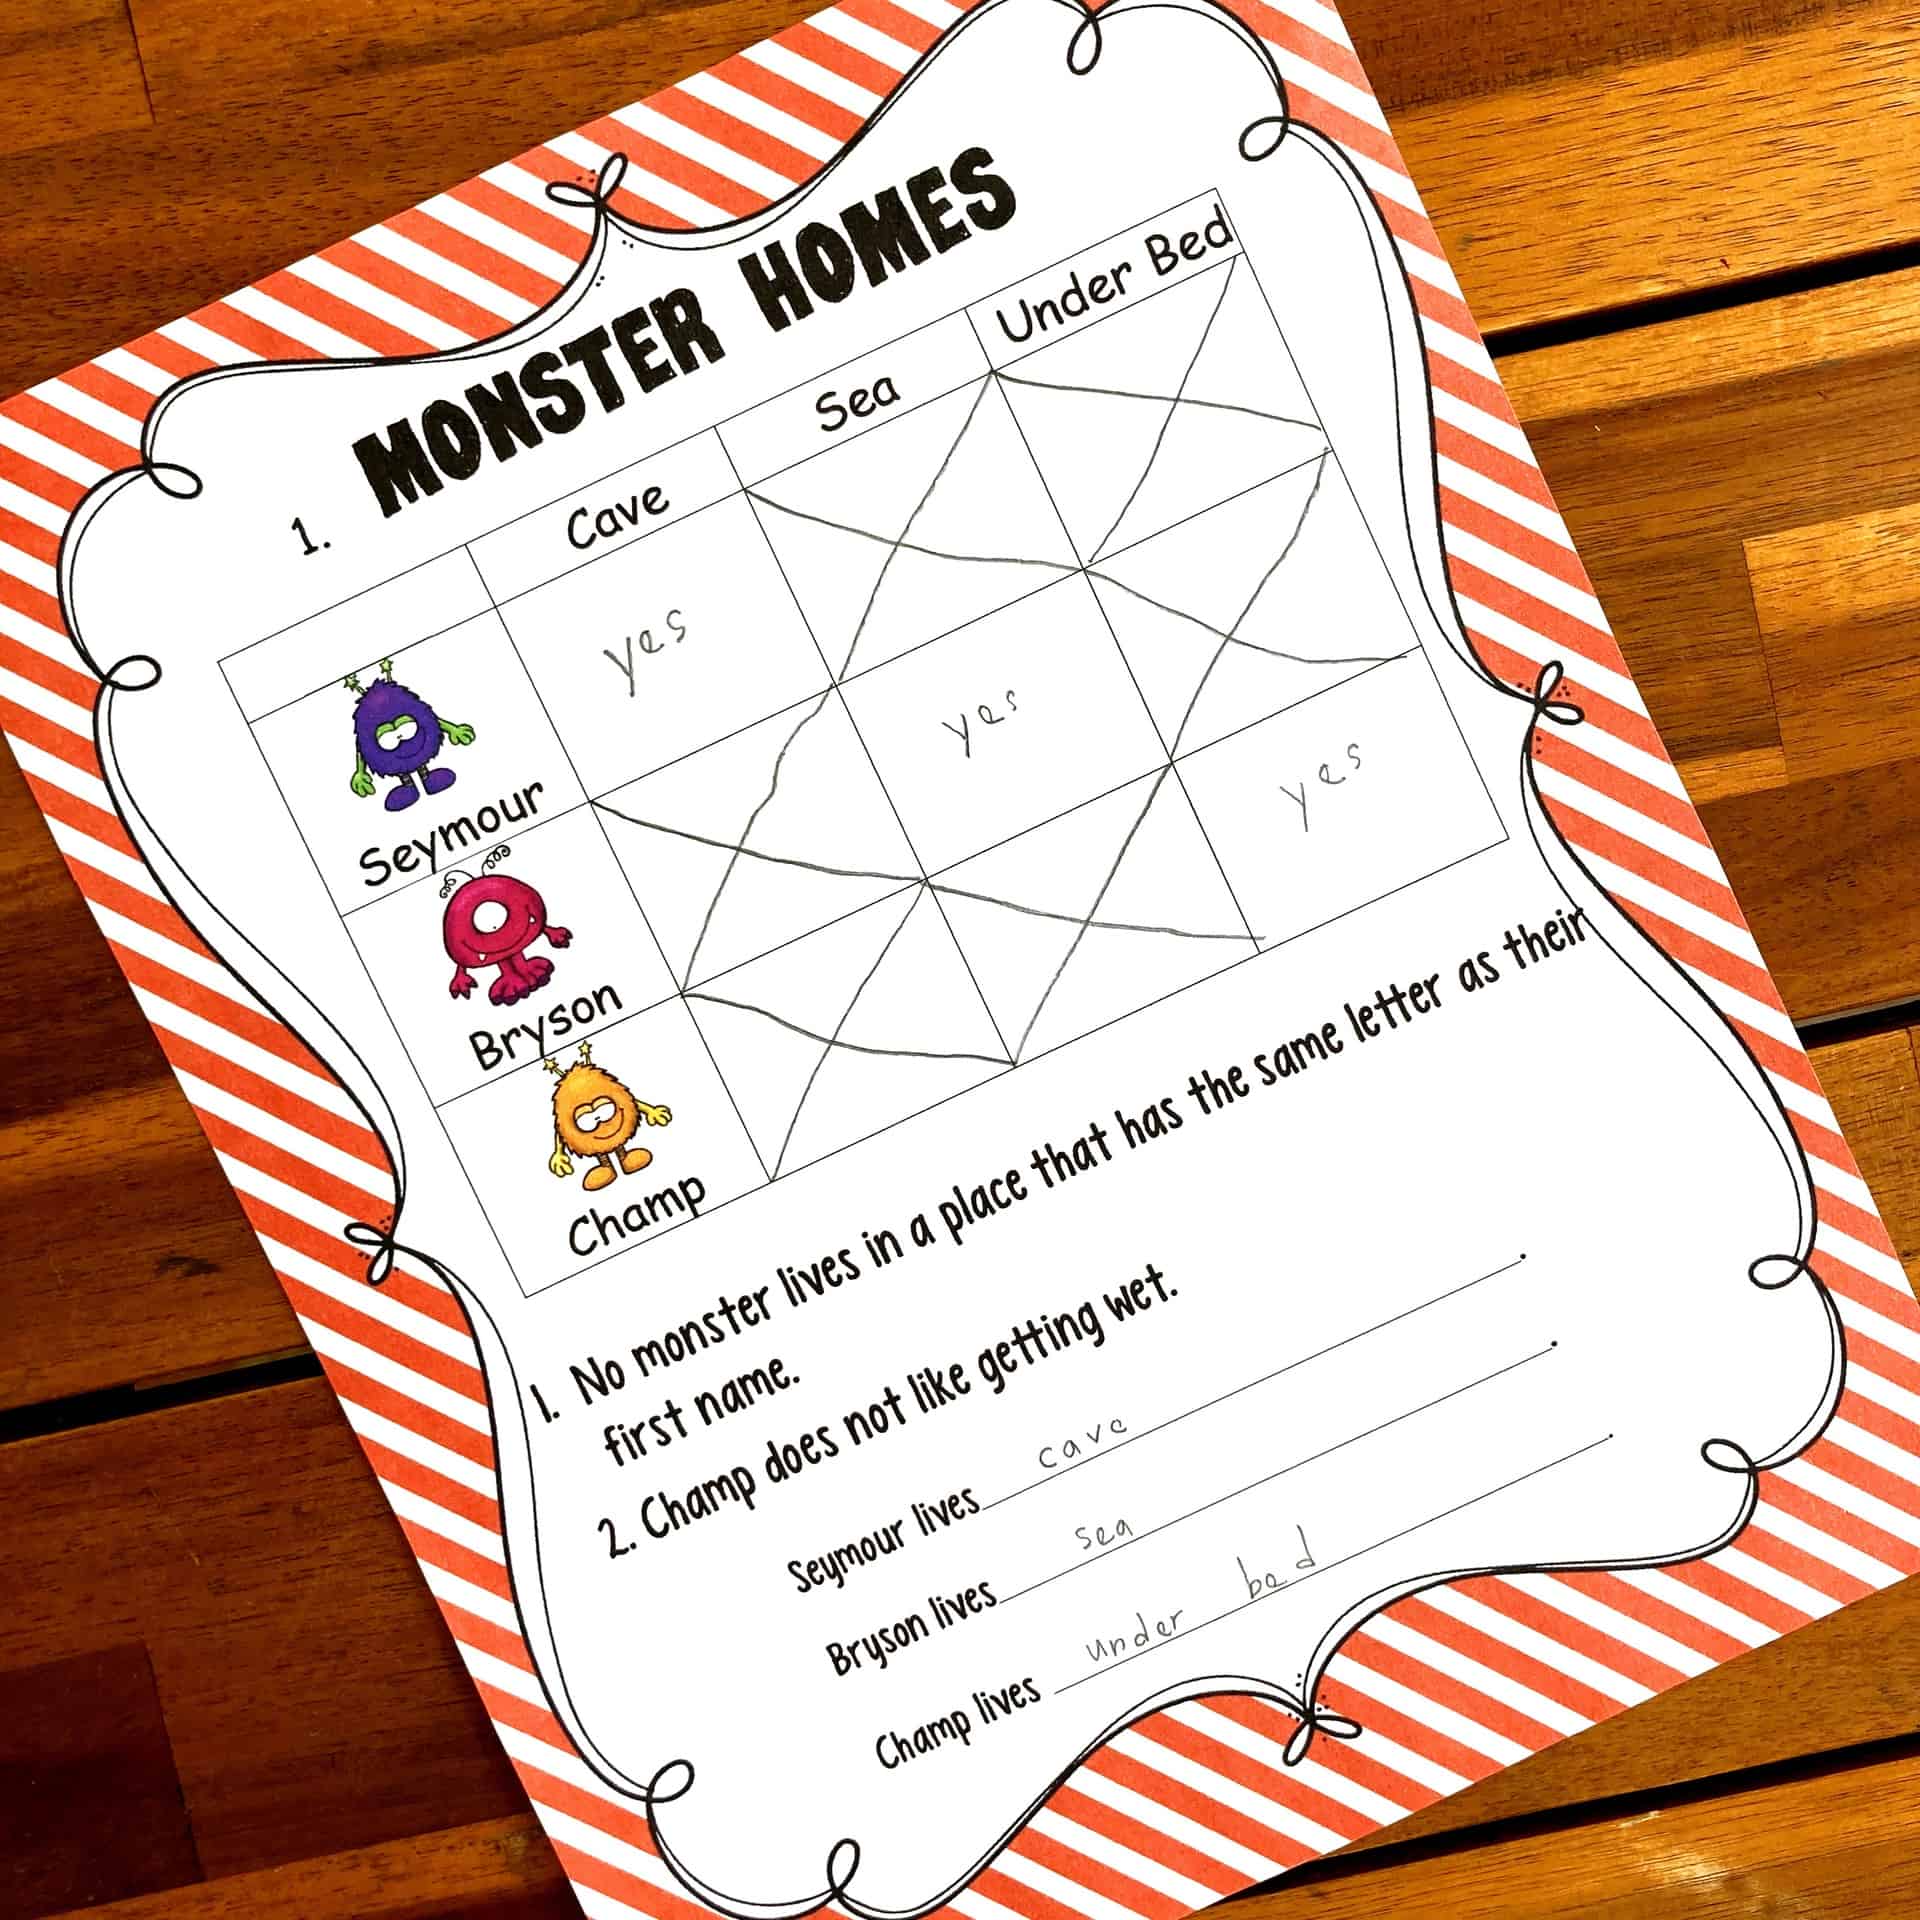 Here Are Free Monster Logic Problems To Get Your Students Thinking